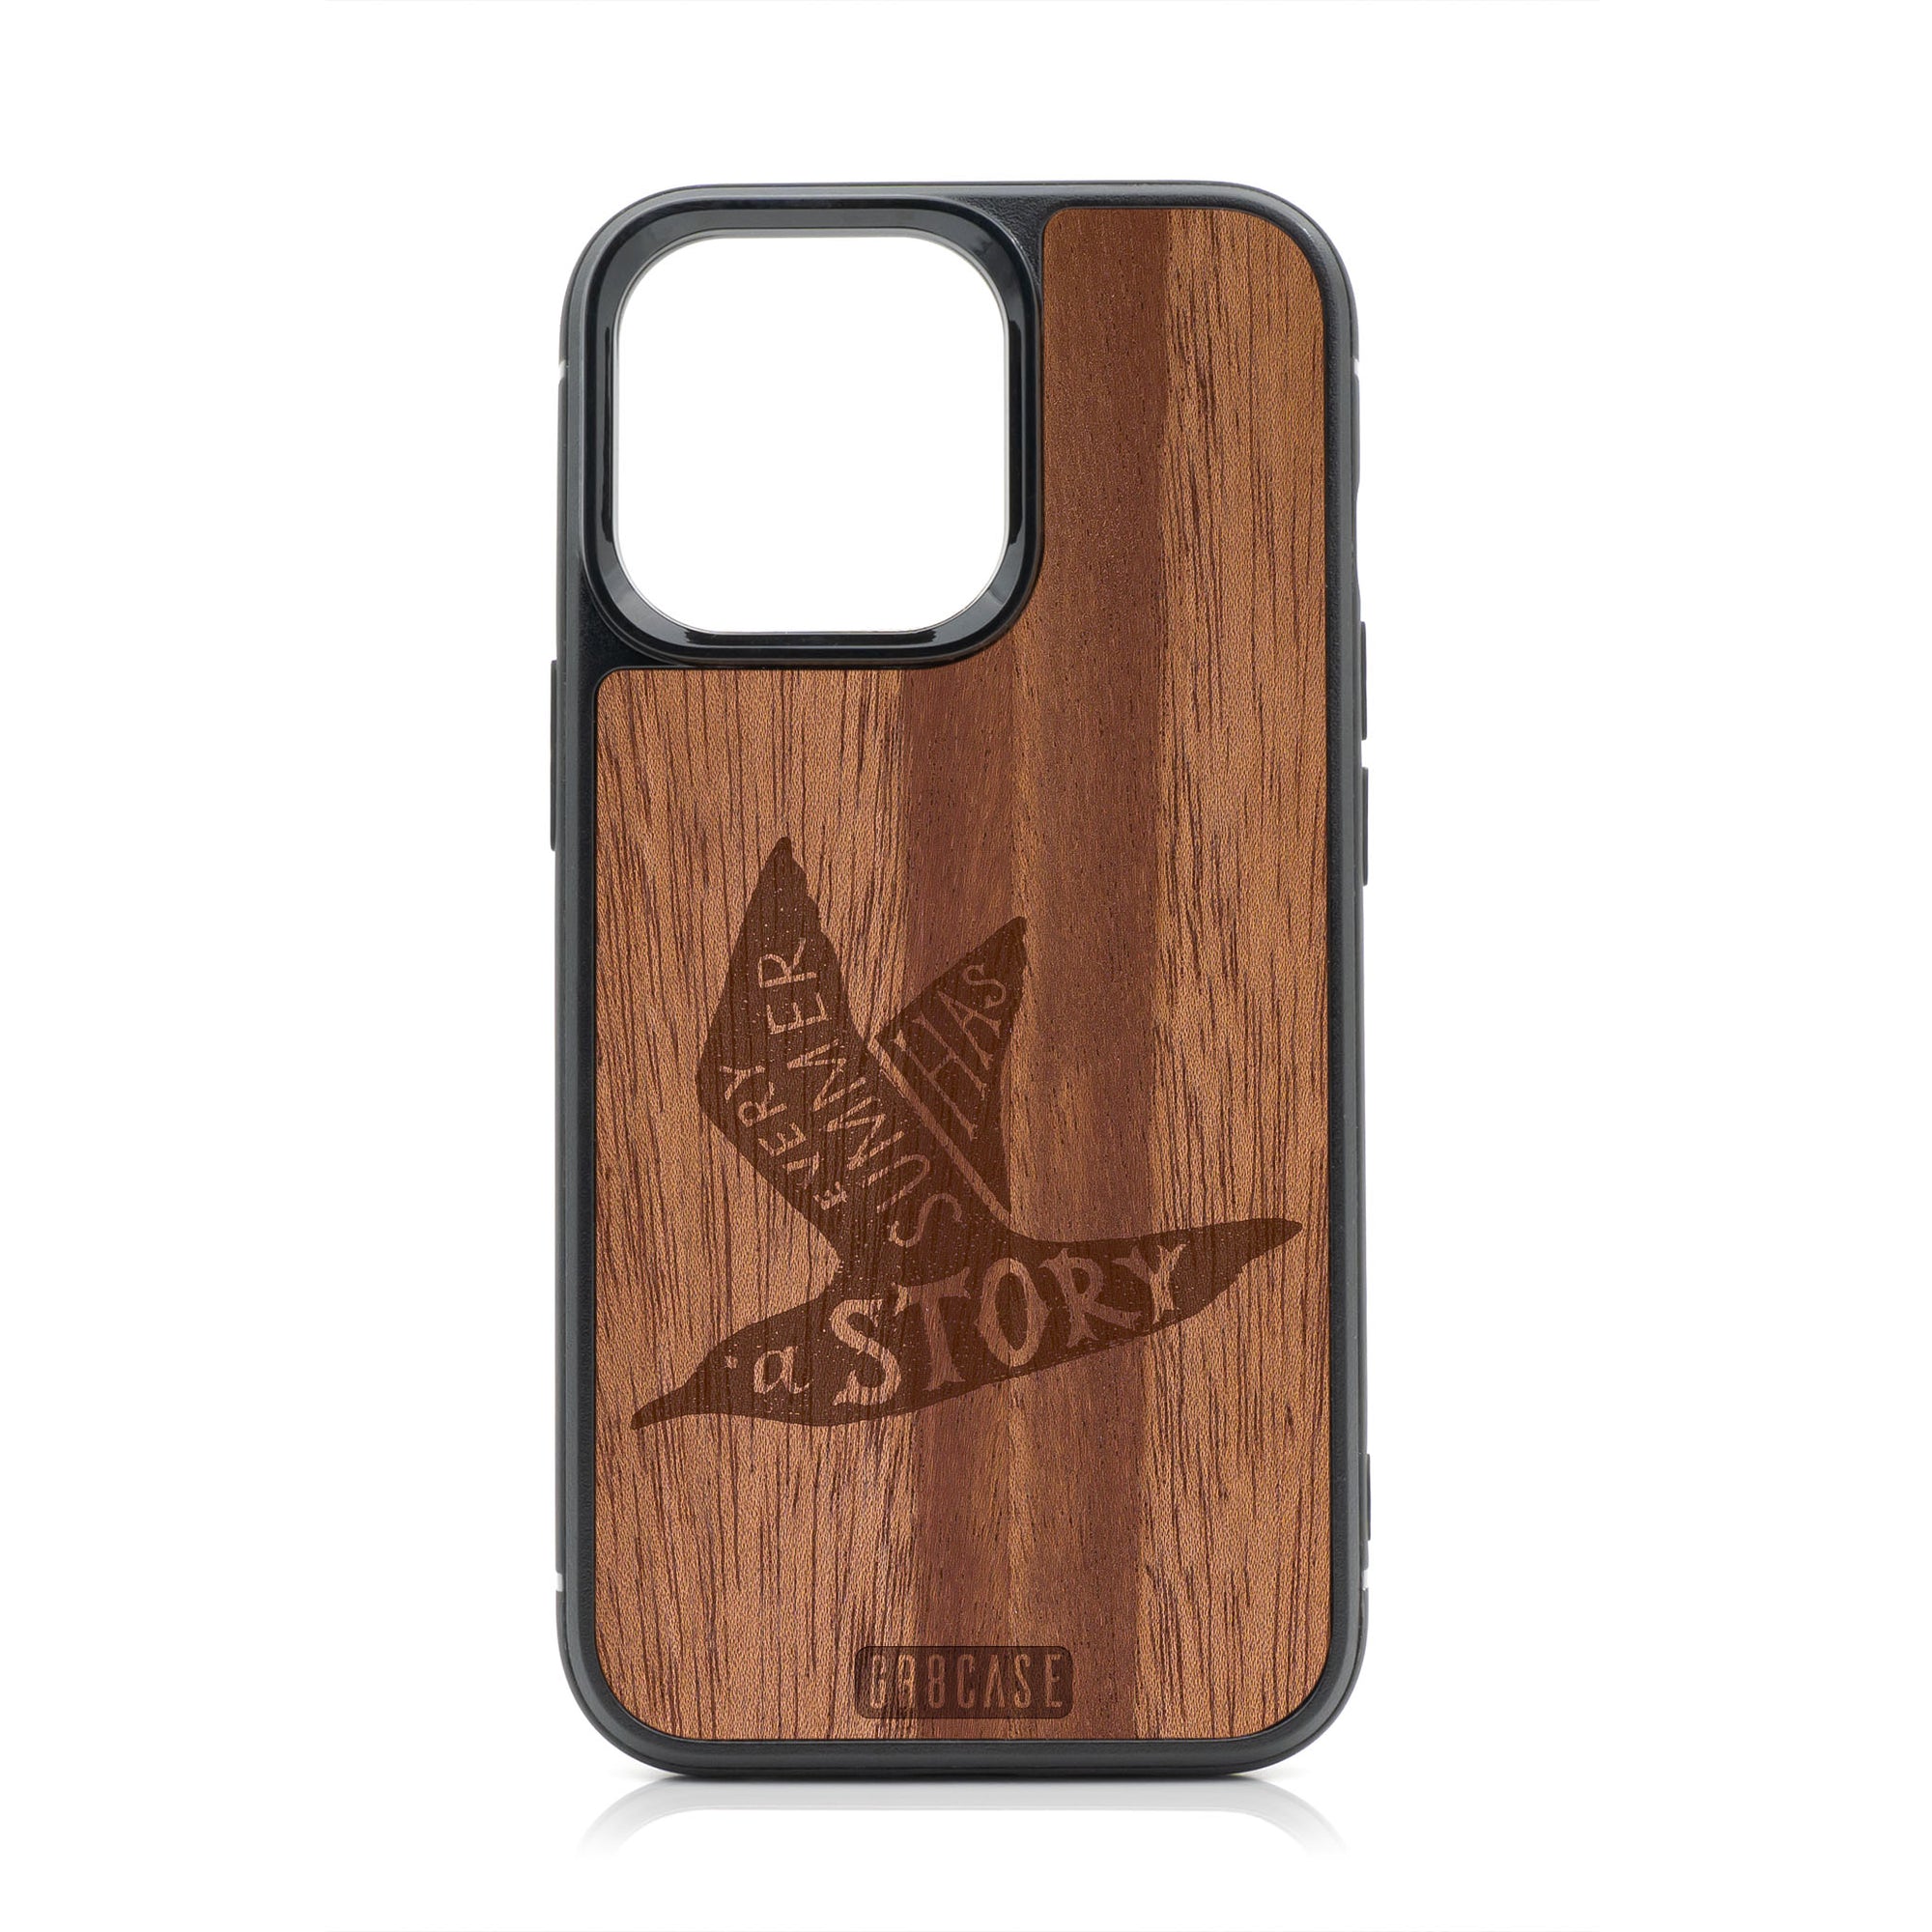 Every Summer Has A Story (Seagull) Design Wood Case For iPhone 13 Pro